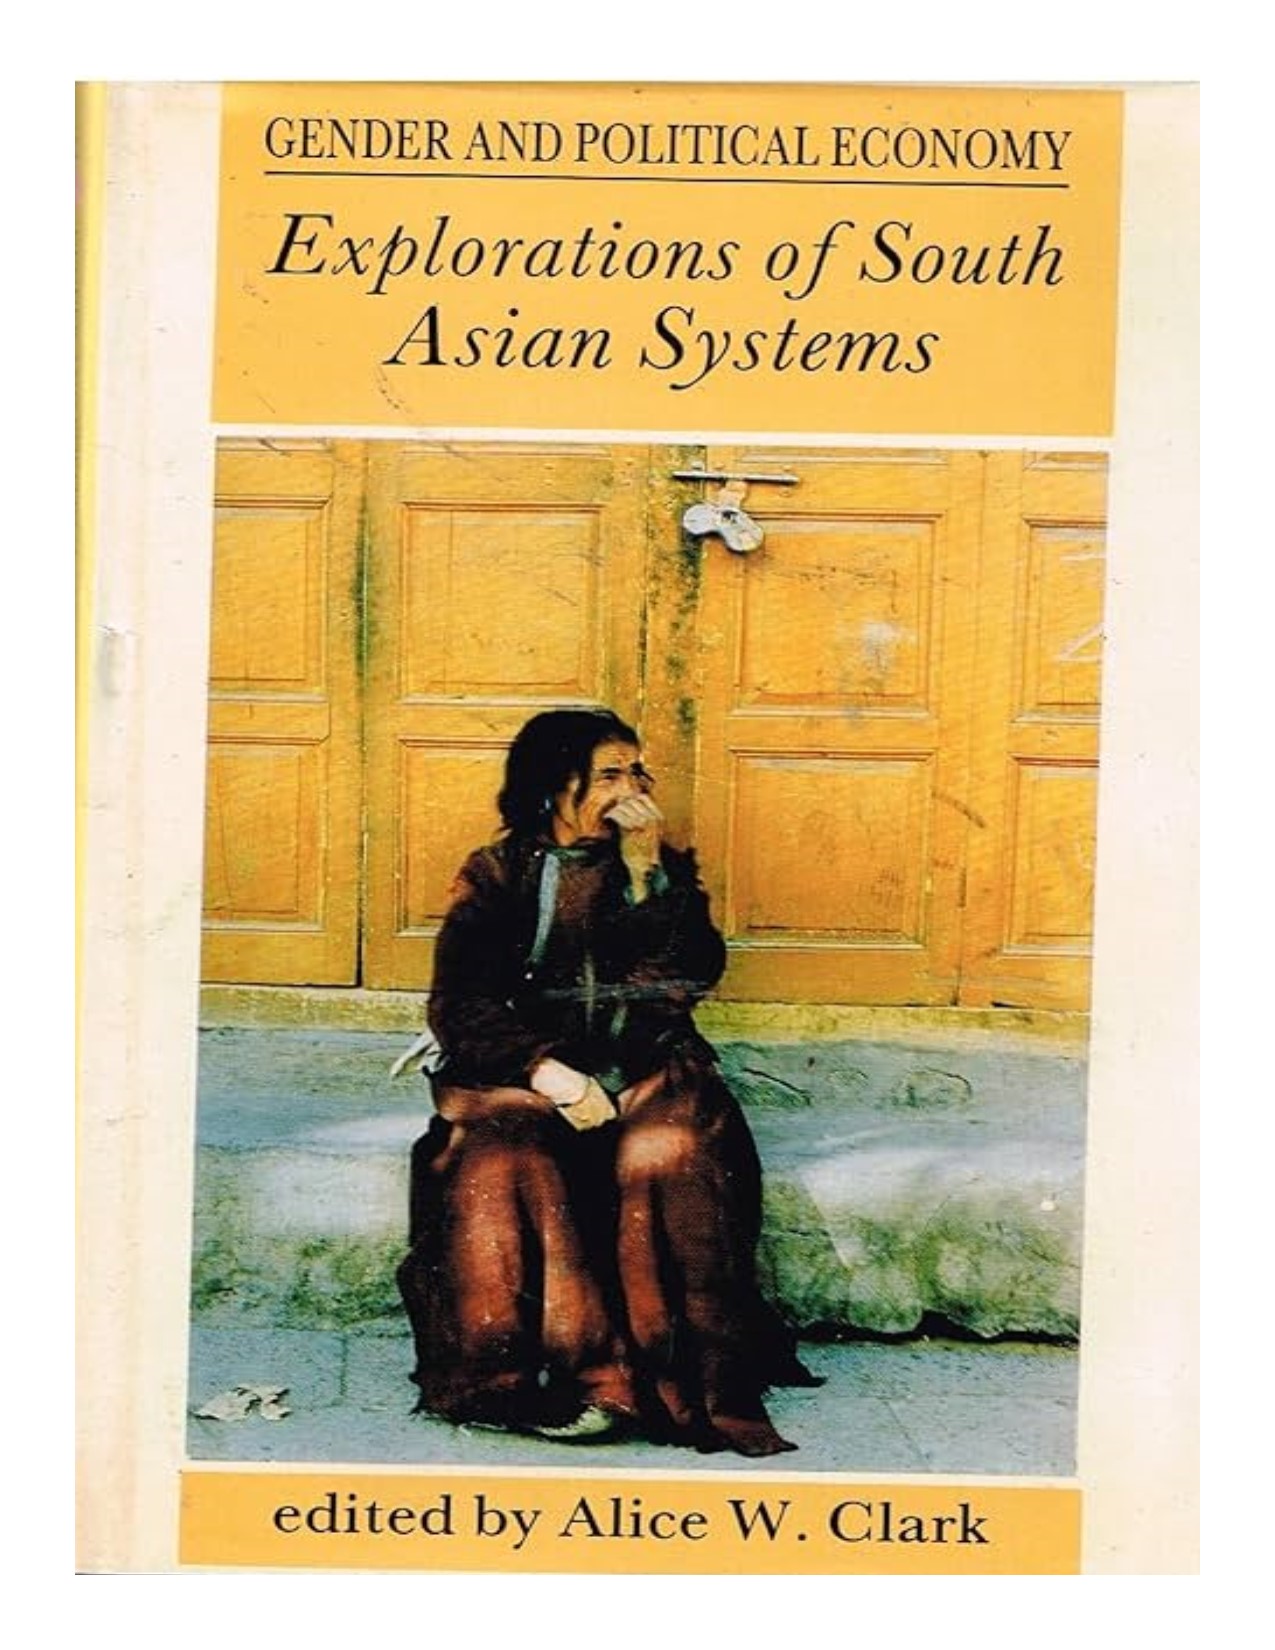 Gender and political economy explorations of South Asian systems